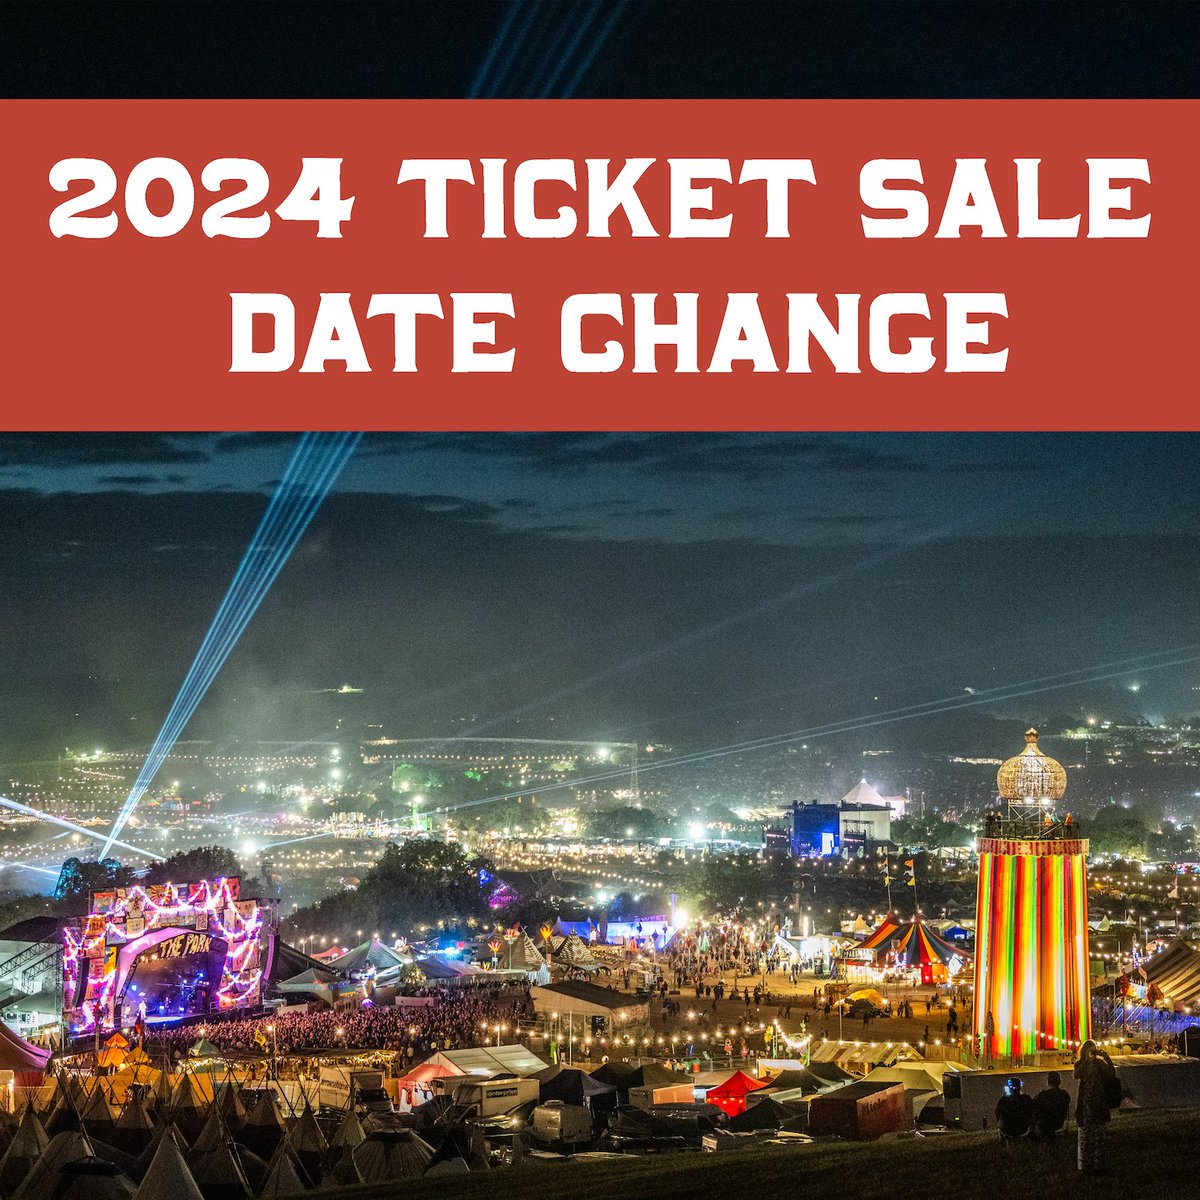 This year's Glastonbury ticket sale has been moved back by two weeks. This is to ensure that everyone who would like to buy a ticket is registered and therefore eligible to purchase one. The new dates for Glastonbury ticket sale are as follows: TICKETS PLUS COACH TRAVEL ON